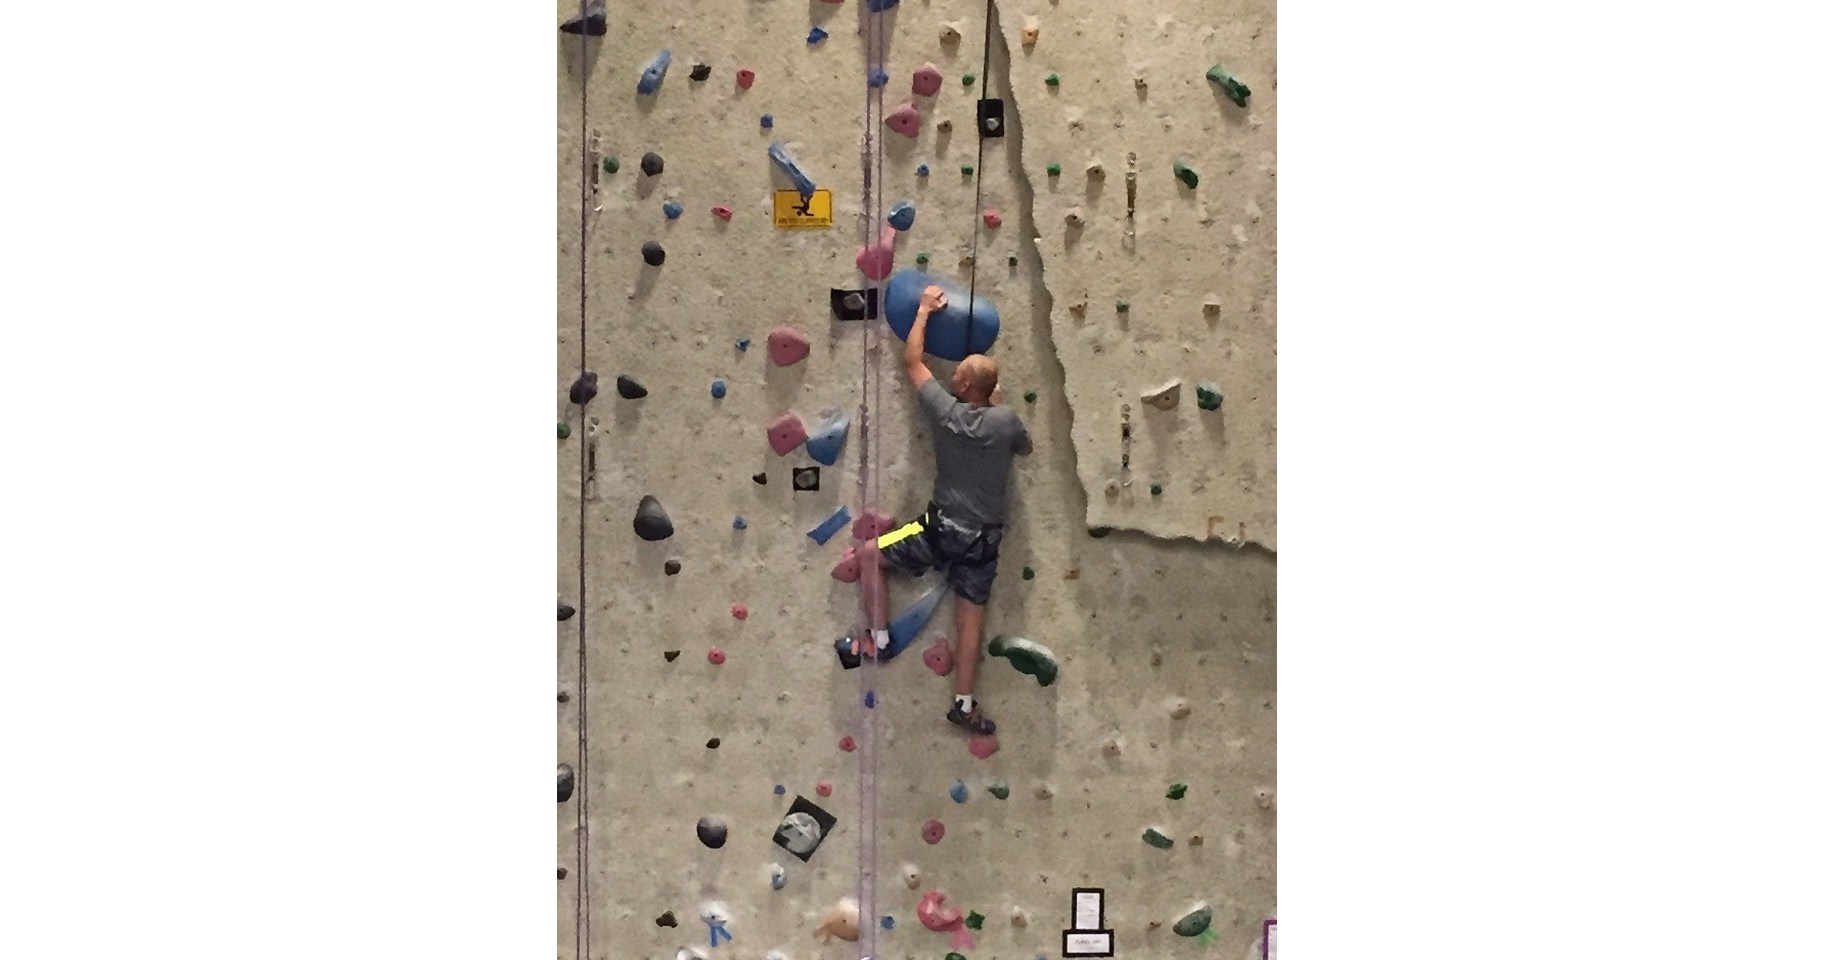 Wounded Warrior Project Veterans Empowered at Rock Climbing Connection Event - PR Newswire (press release)